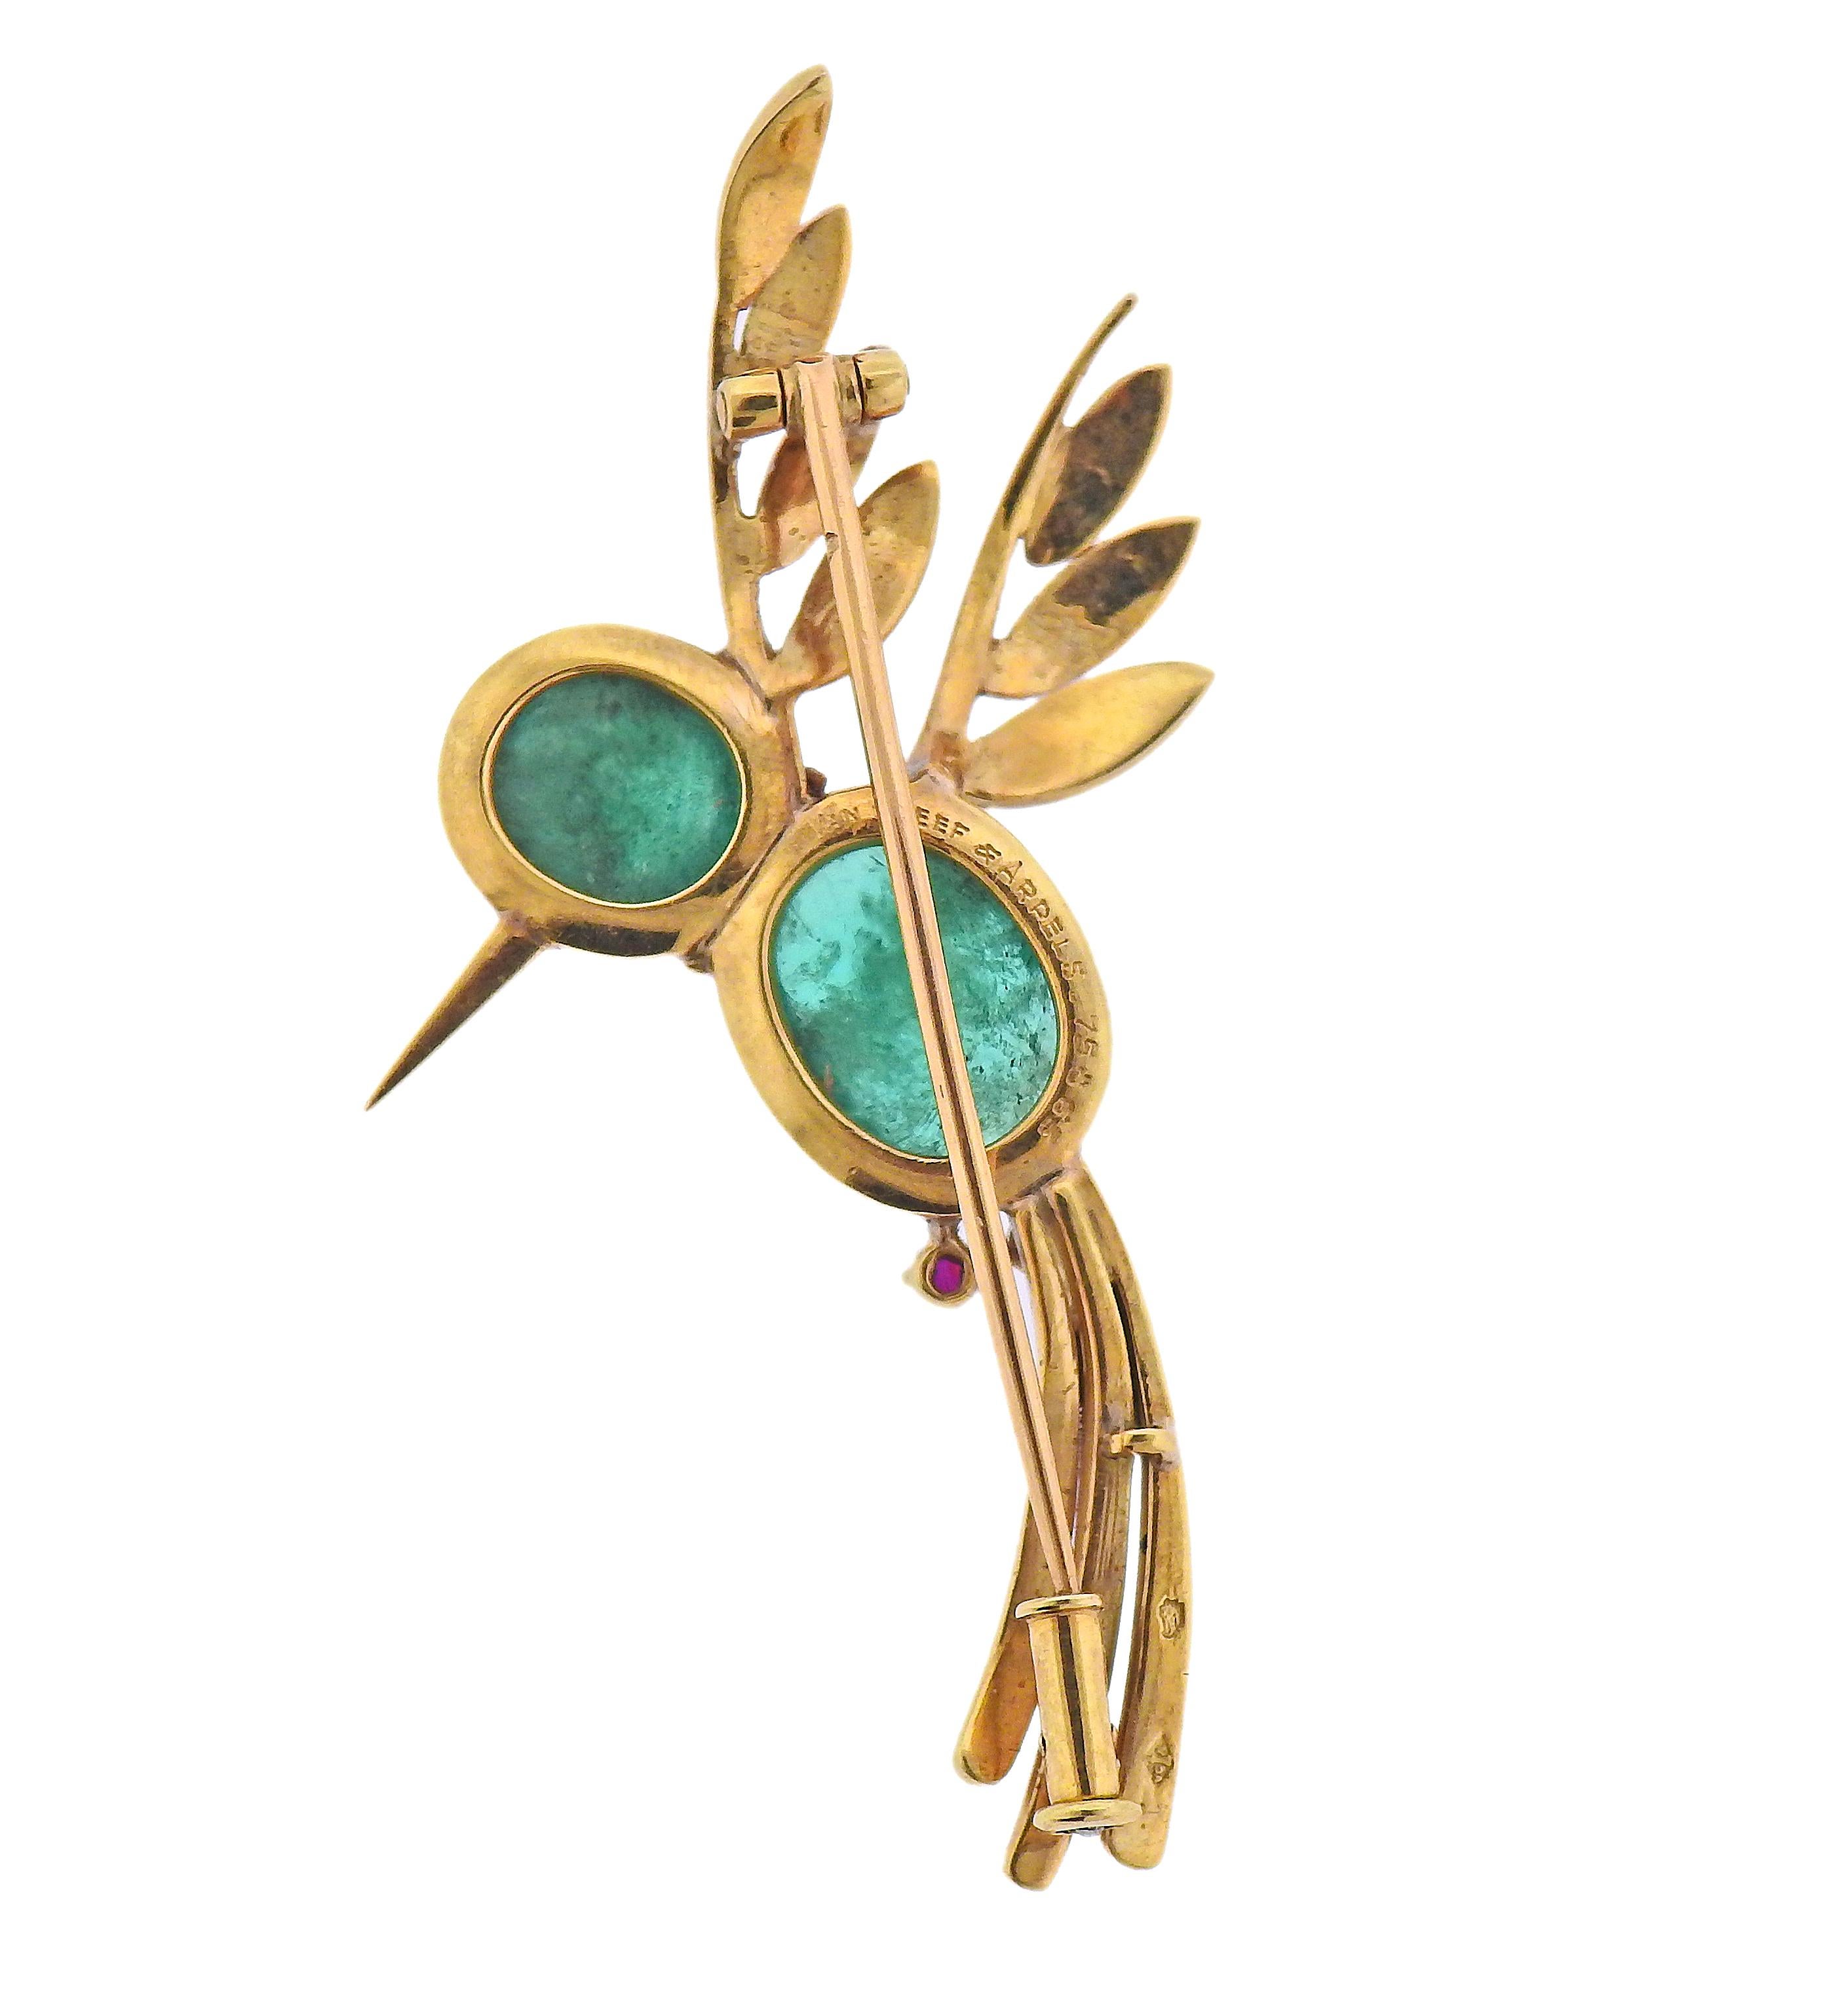 Adorable 18k gold hummingbird brooch by Van Cleef & Arpels, with two emerald cabochons (measuring 9 x 8.3mm and 12.3 x 9.3mm) ruby eye and two rubies on the tail. Brooch measures 55mm x 30mm. Marked: Van Cleef & Arpels, 75863. Weight - 11 grams. 